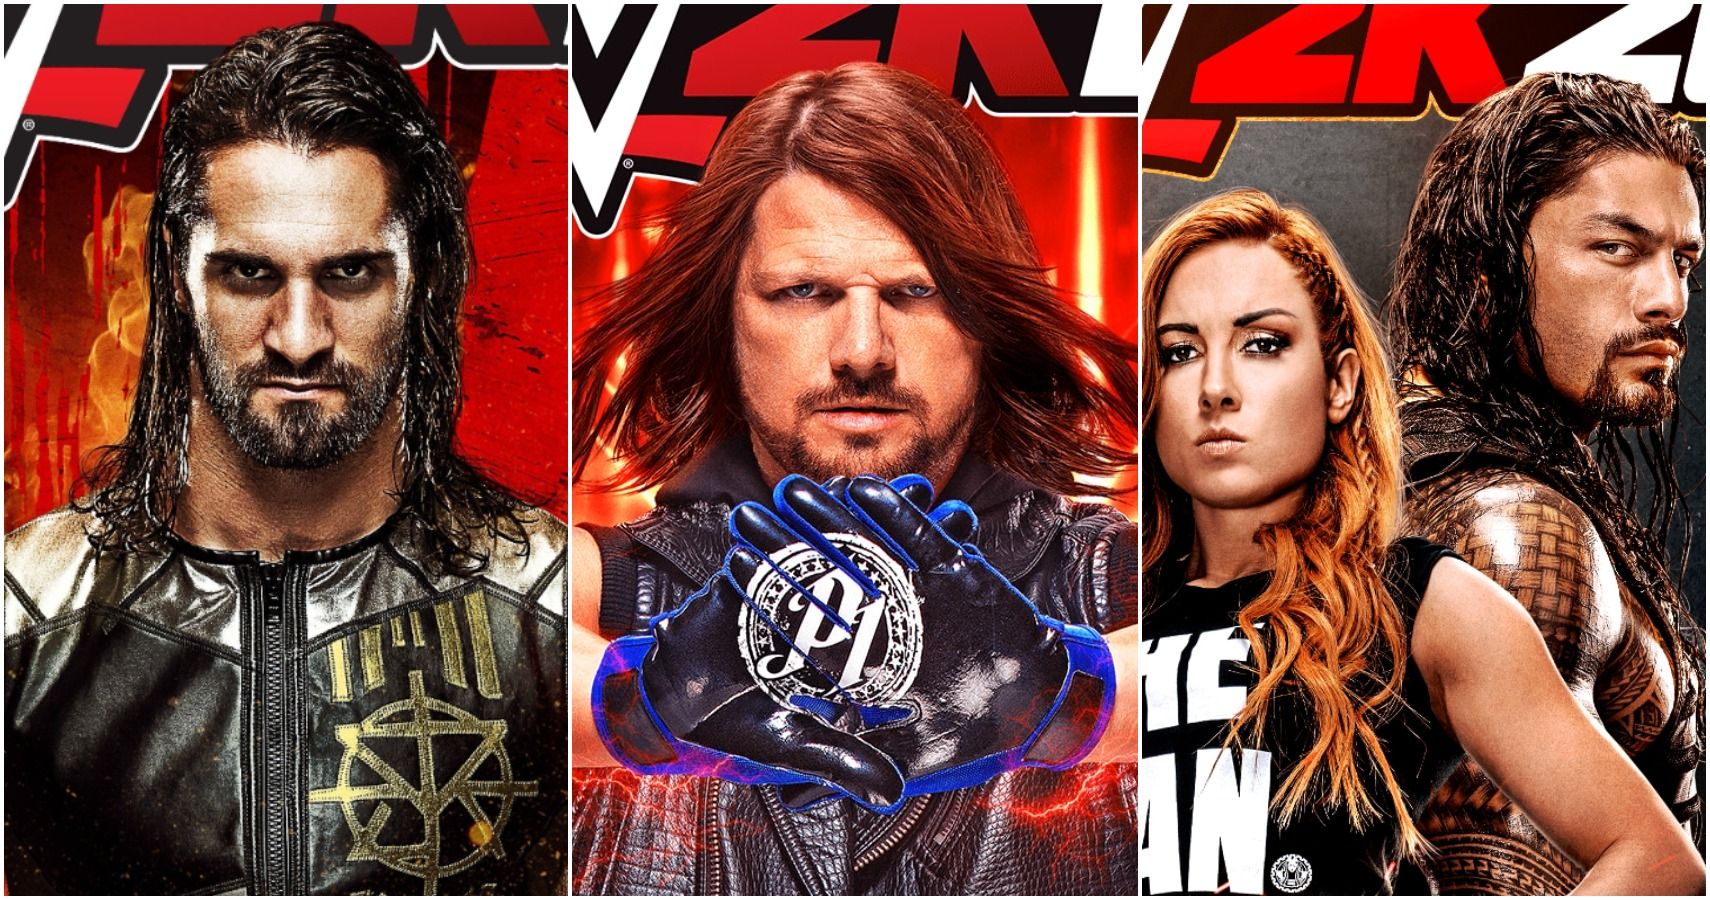 Fans Have Had Their Say On Who Should Grace The Cover Of Wwe 2k22